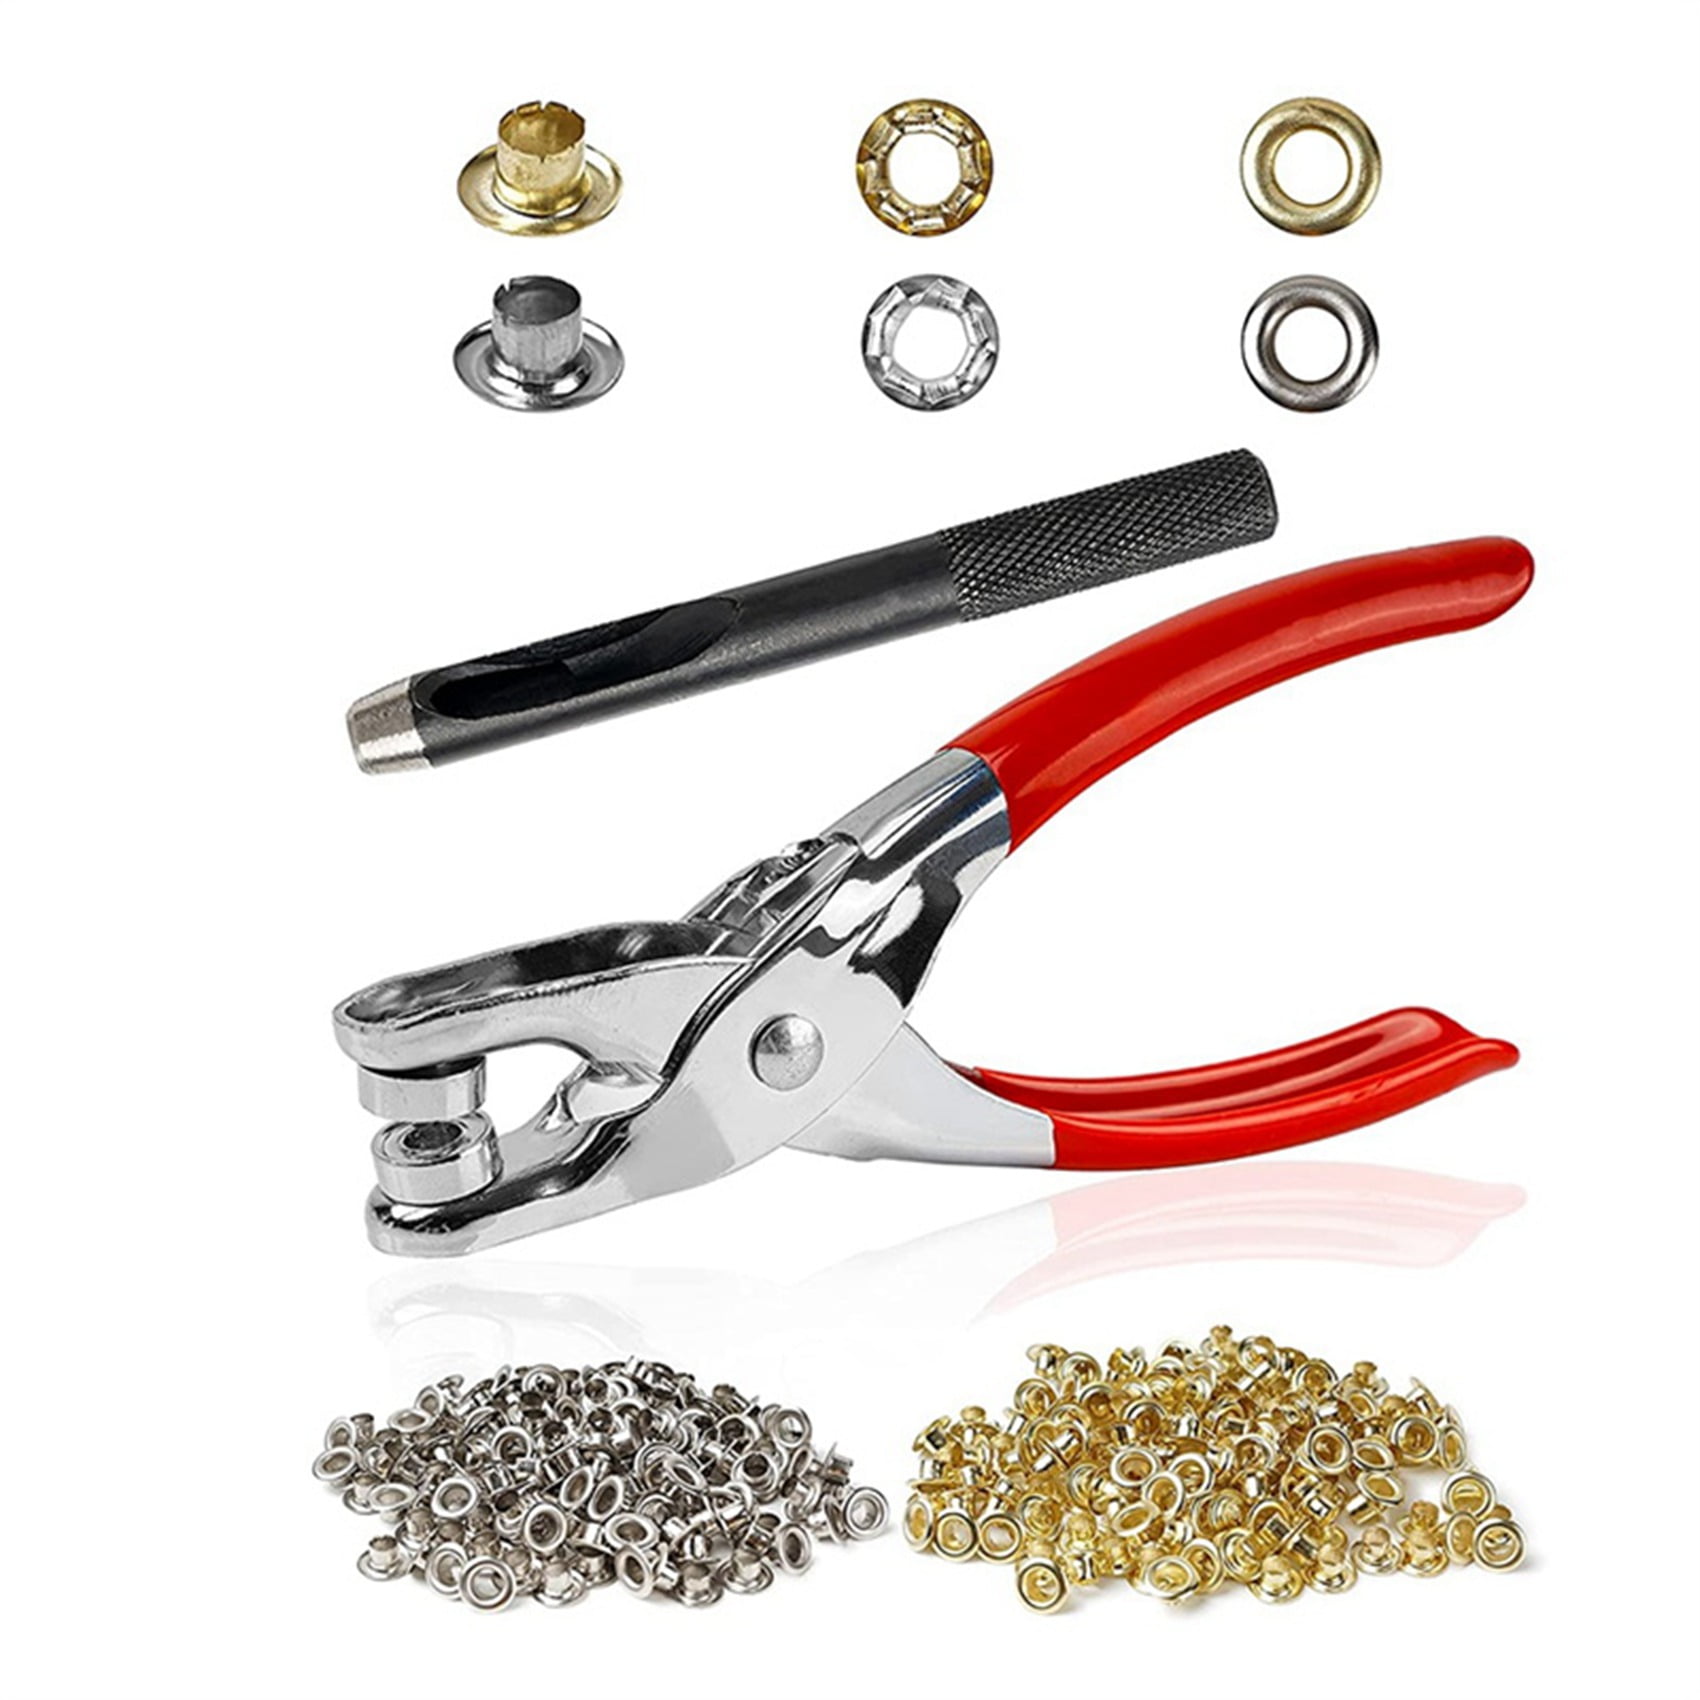  Grommet Eyelet Pliers Kit 1/4 Inch 6mm with Eyelet Hole Punch  and 400 Metal Eyelets with Washers,Portable Grommet Hand Press kit for  Leather,Belt,Shoes,Fabric,Cloths : Arts, Crafts & Sewing